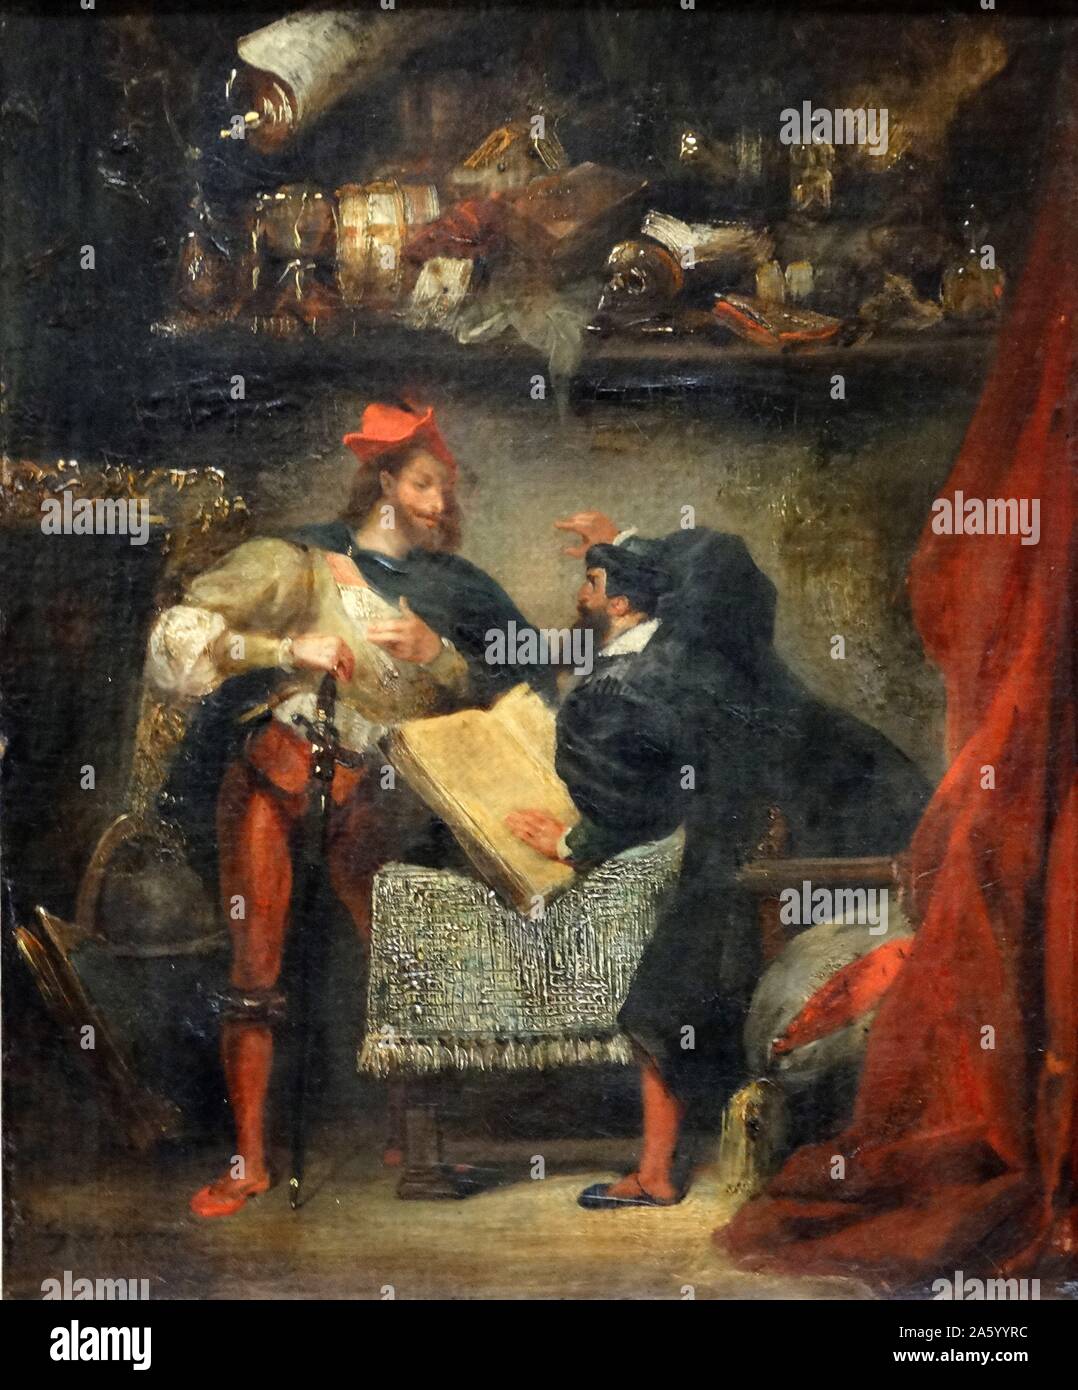 Painting titled 'Faust and Mephistopheles' by Eugène Delacroix (1798-1863) French Romantic artist. Dated 1840 Stock Photo